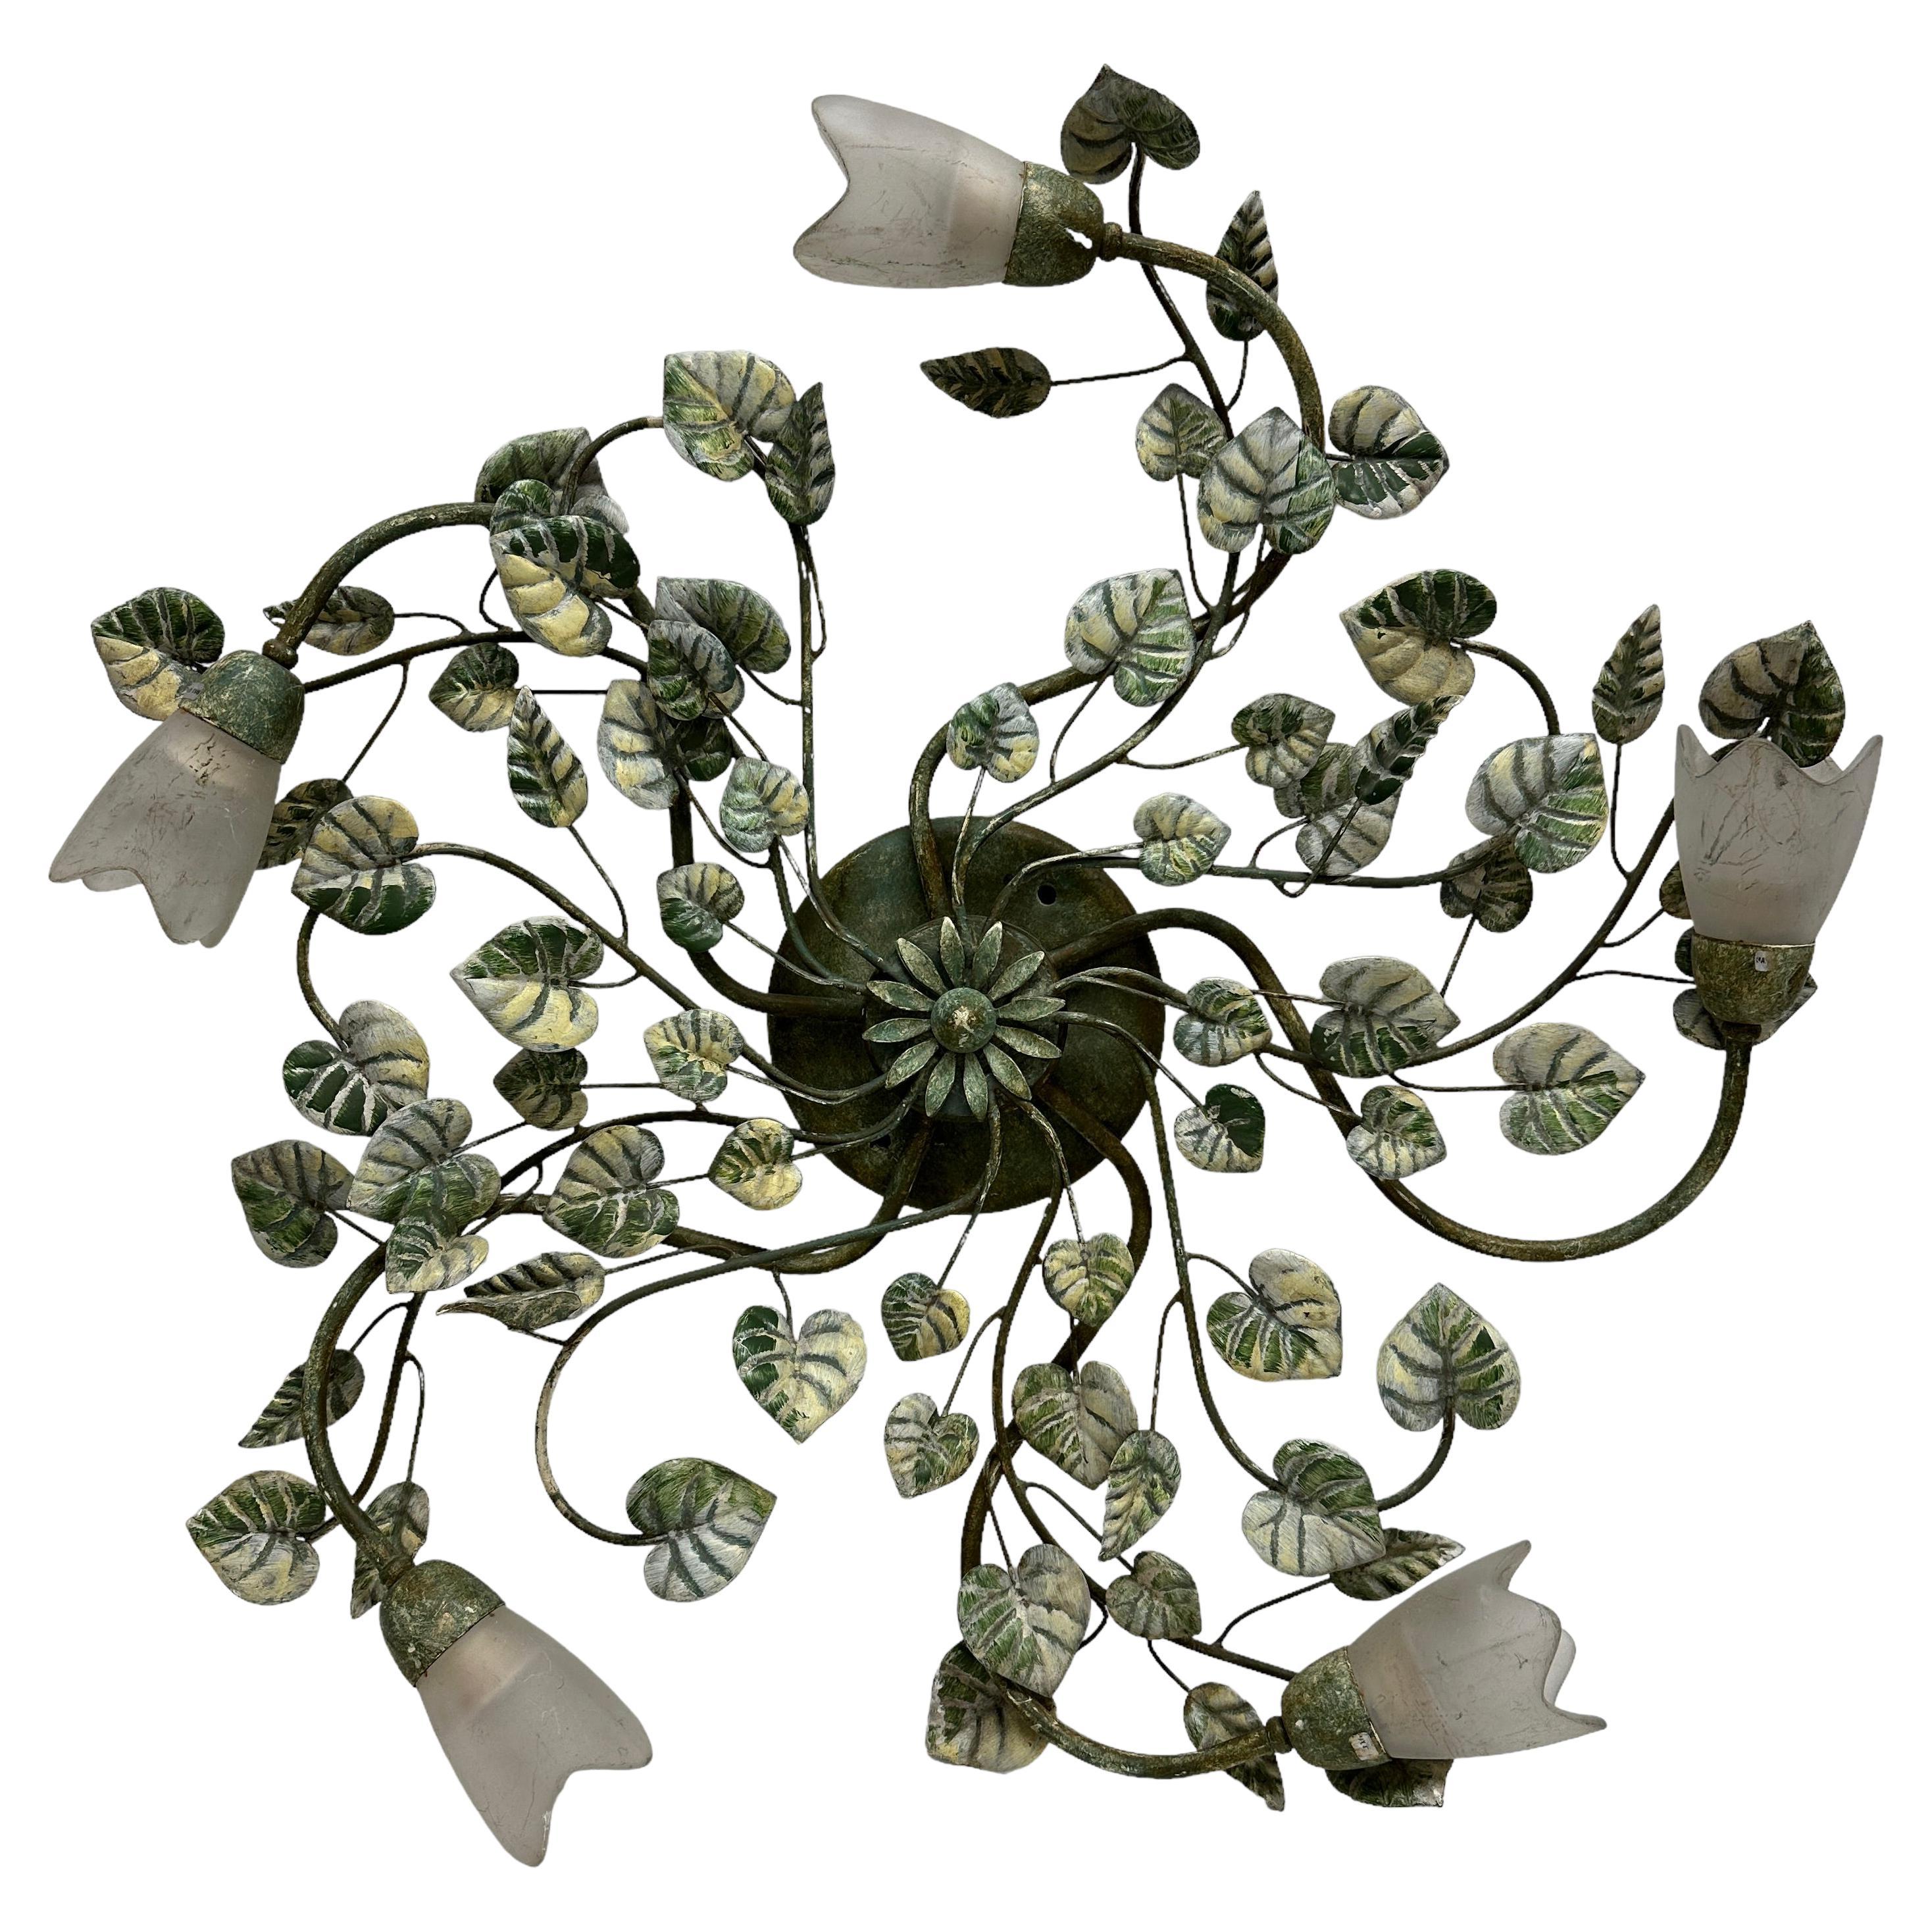 Add a touch of opulence to your home with this charming flush mount light. Perfect stunning colored design with glass shades and hand painted leaves on fine stems, to enhance any chic or eclectic home. We'd love to see it hanging in an entryway as a